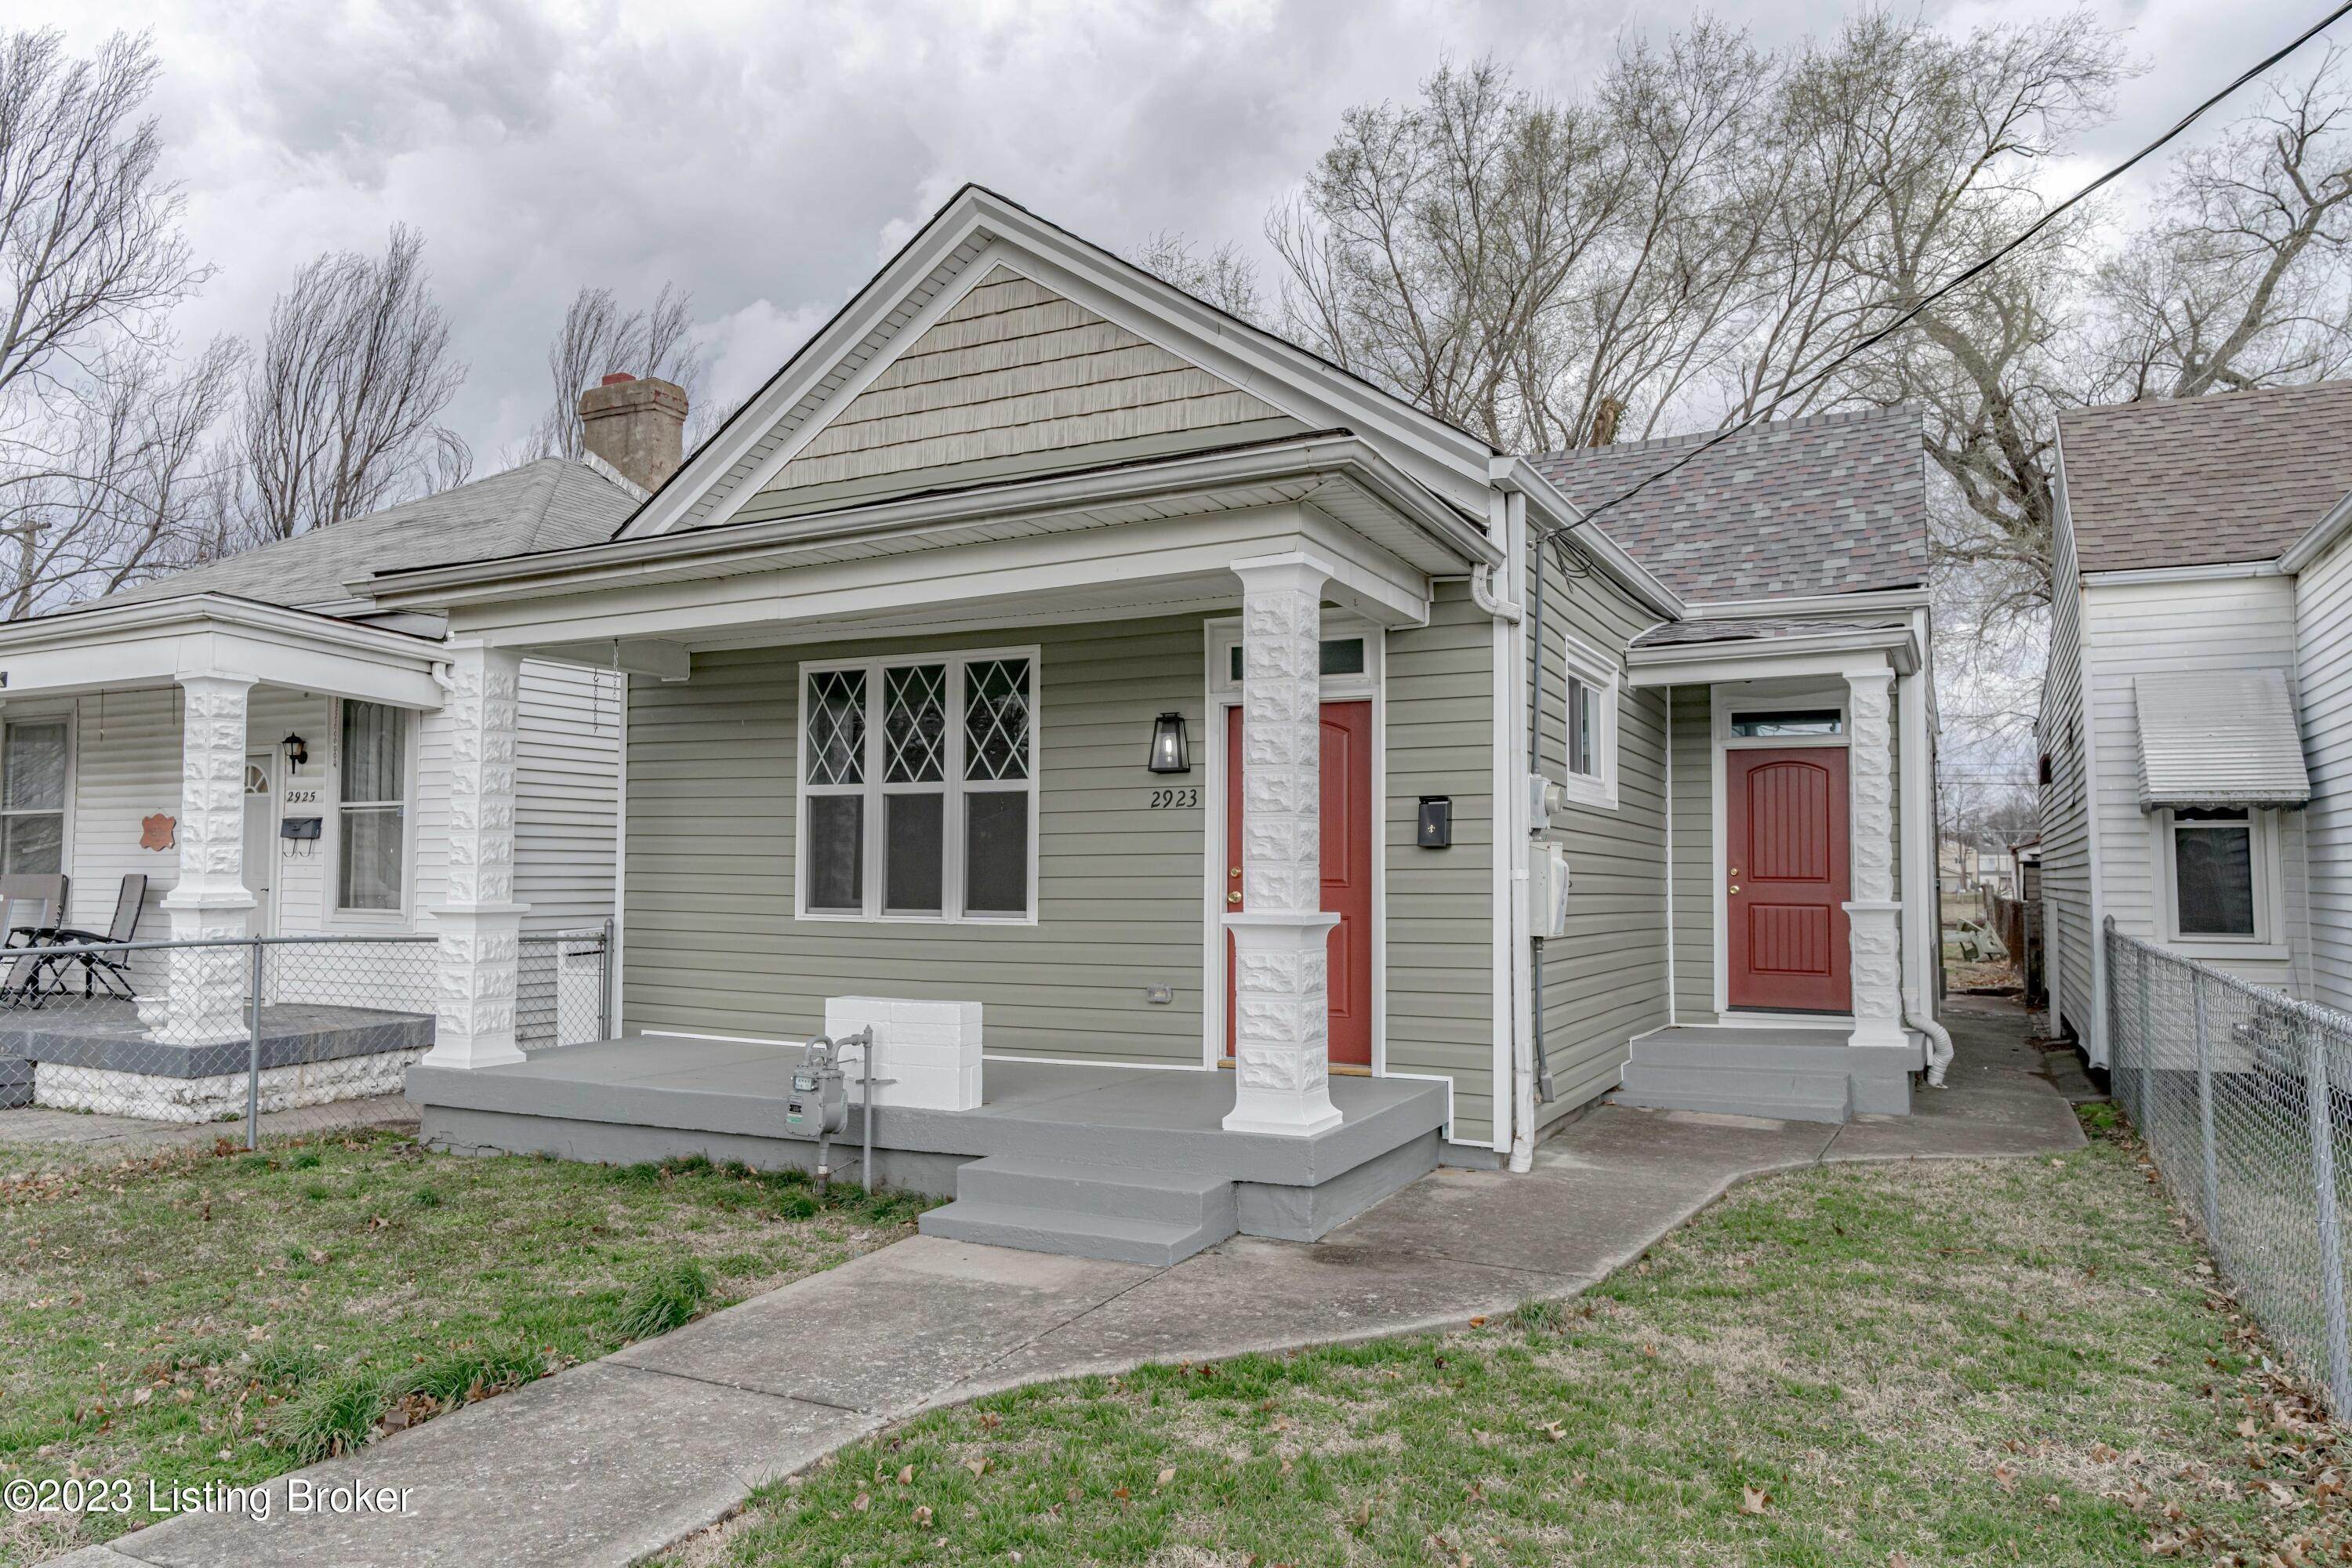 5. Single Family at Louisville, KY 40212